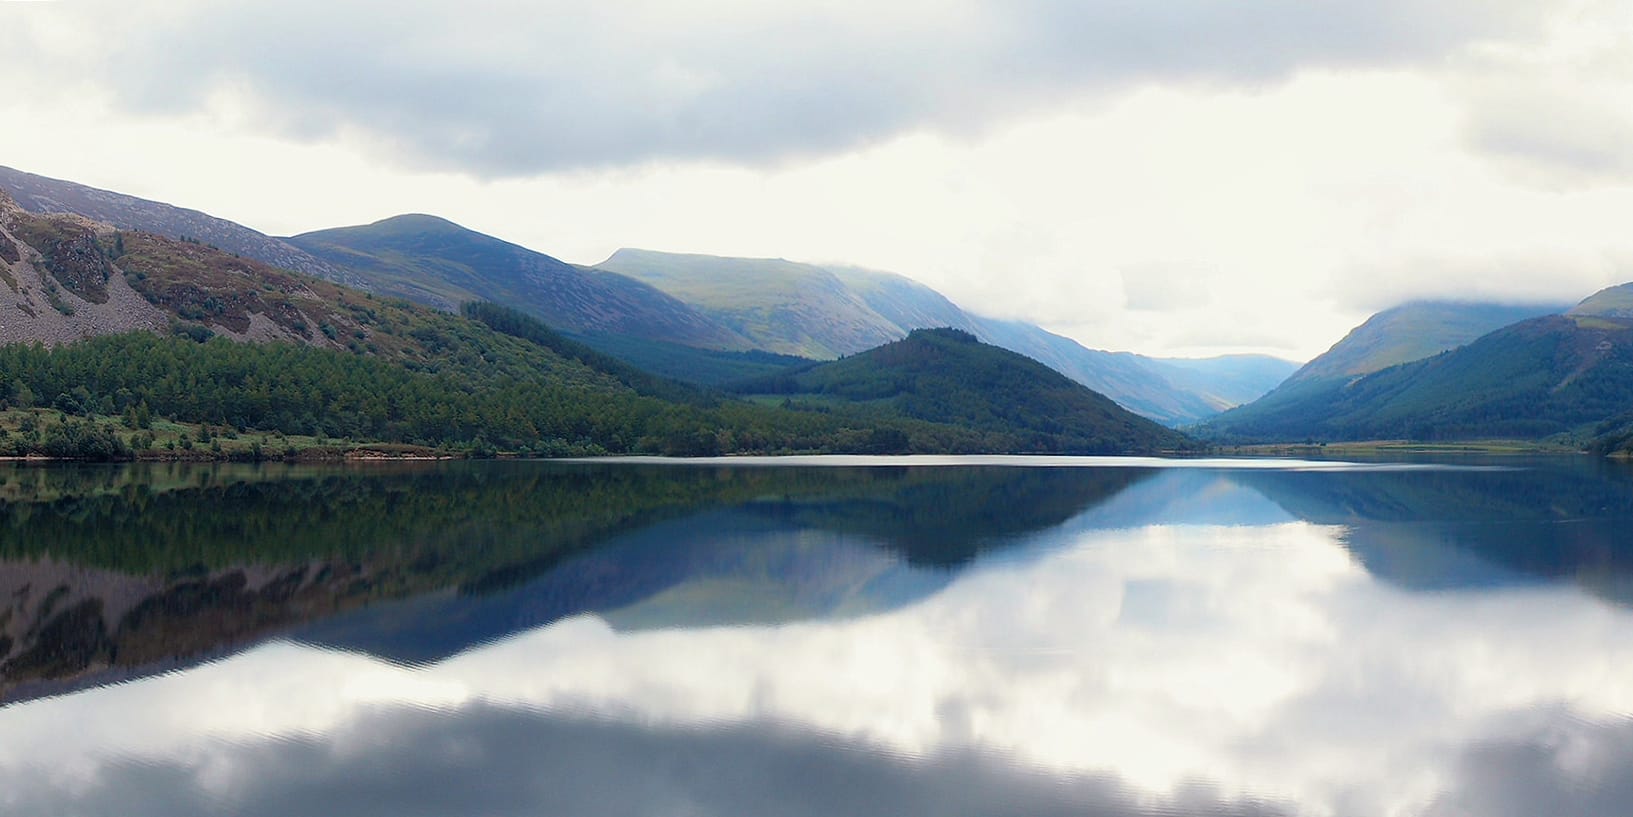 Panoramic view over Ennerdale Water to the East, Lake District. Photo by Kreuzschnabel, licensed CC-by-SA-3.0